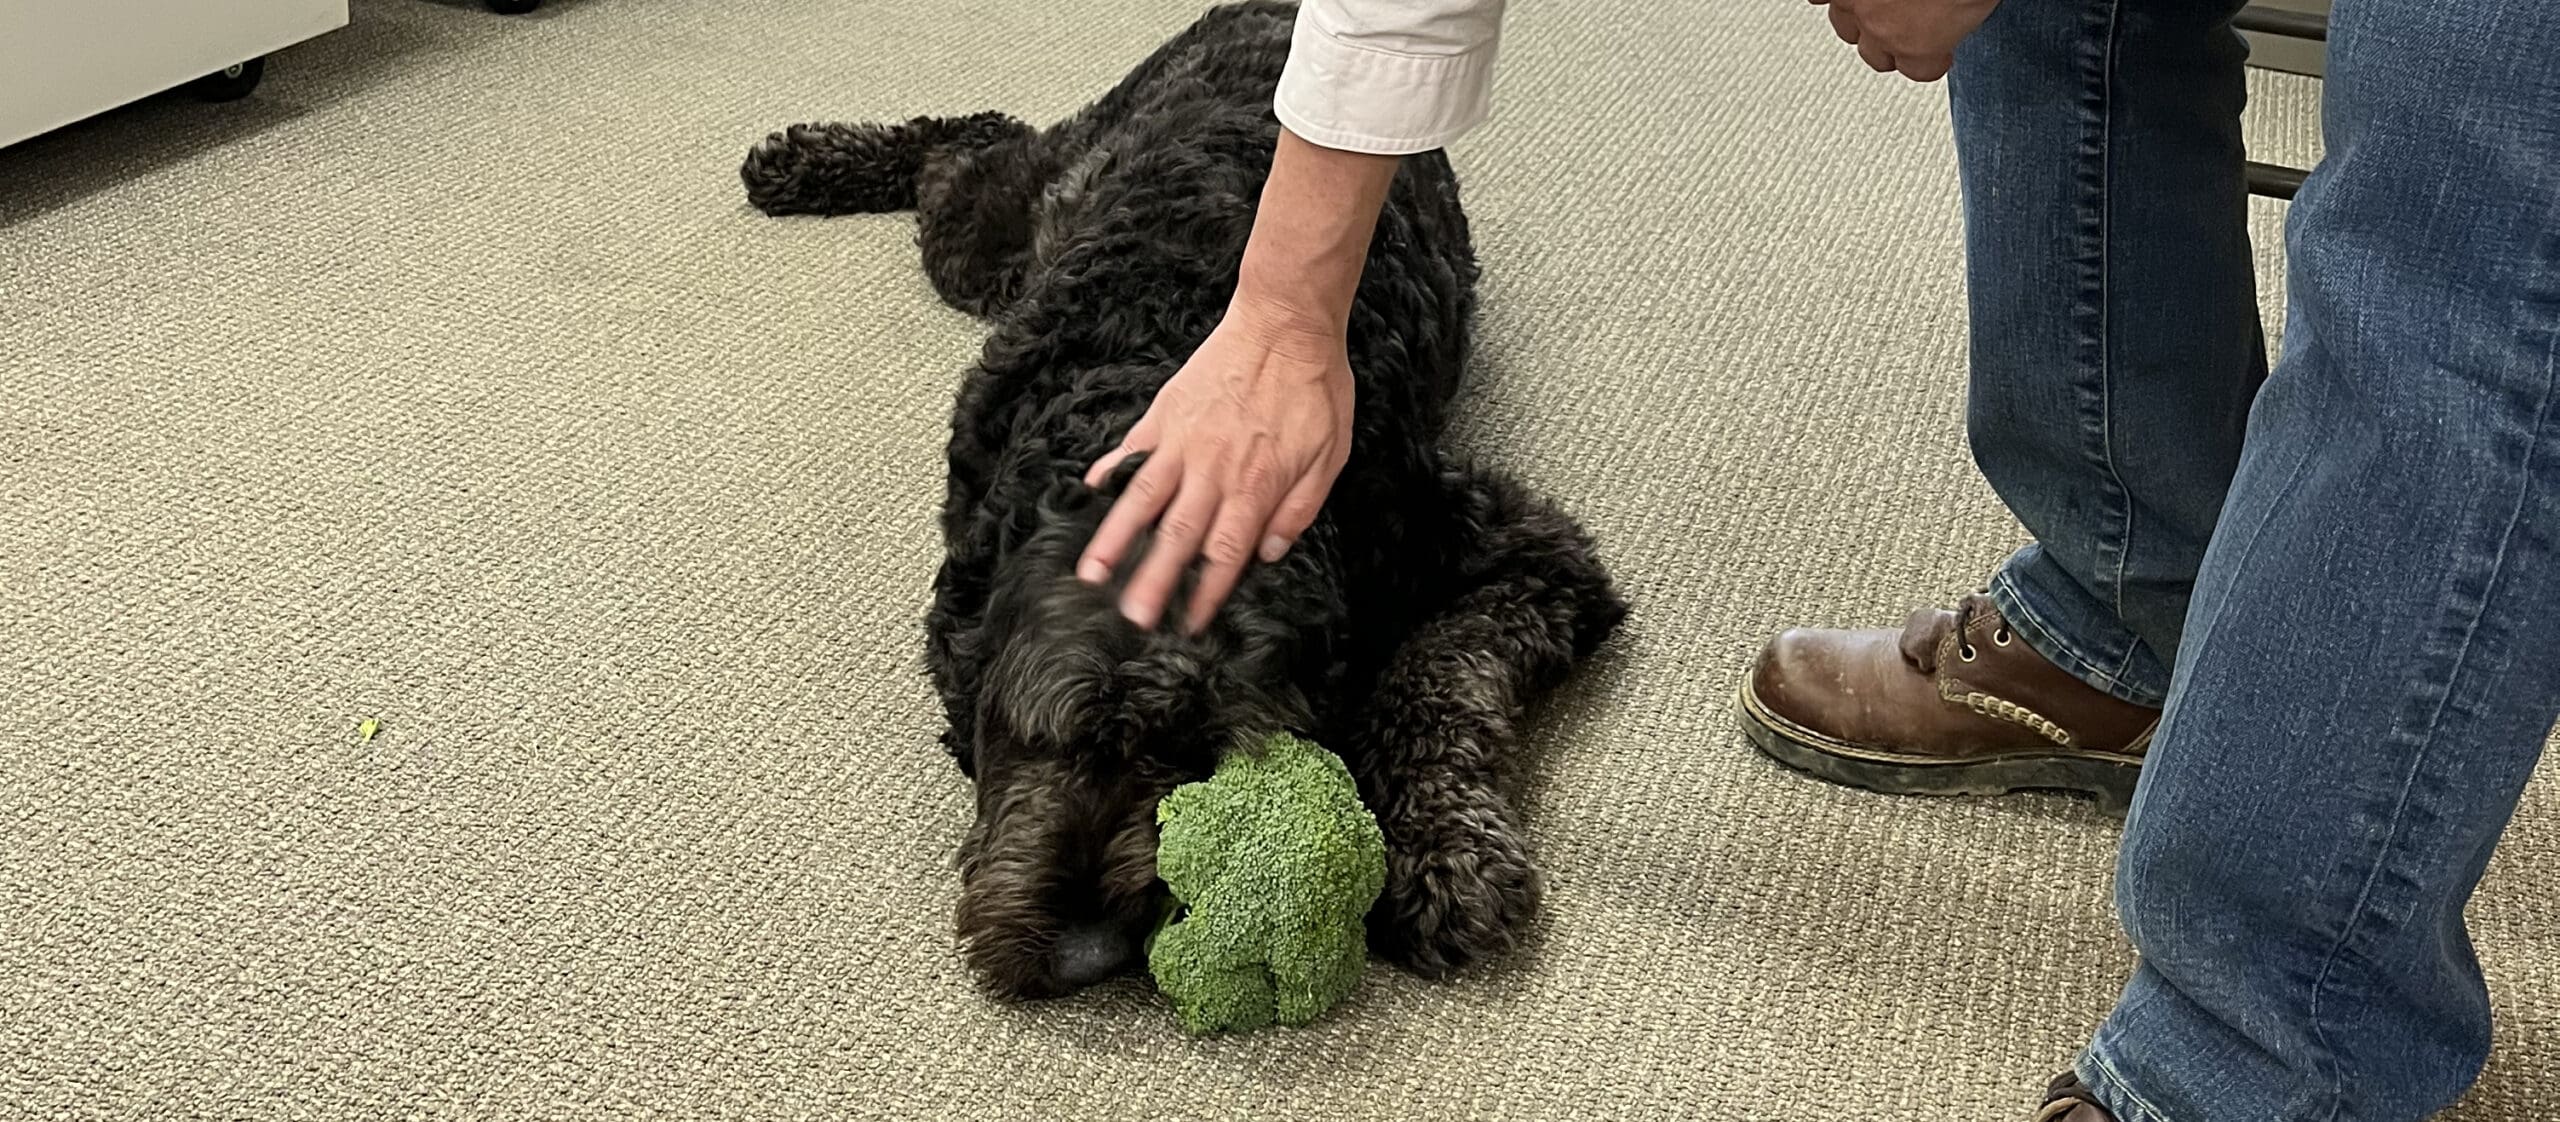 A large black dog lounging on the floor with a head of broccoli.